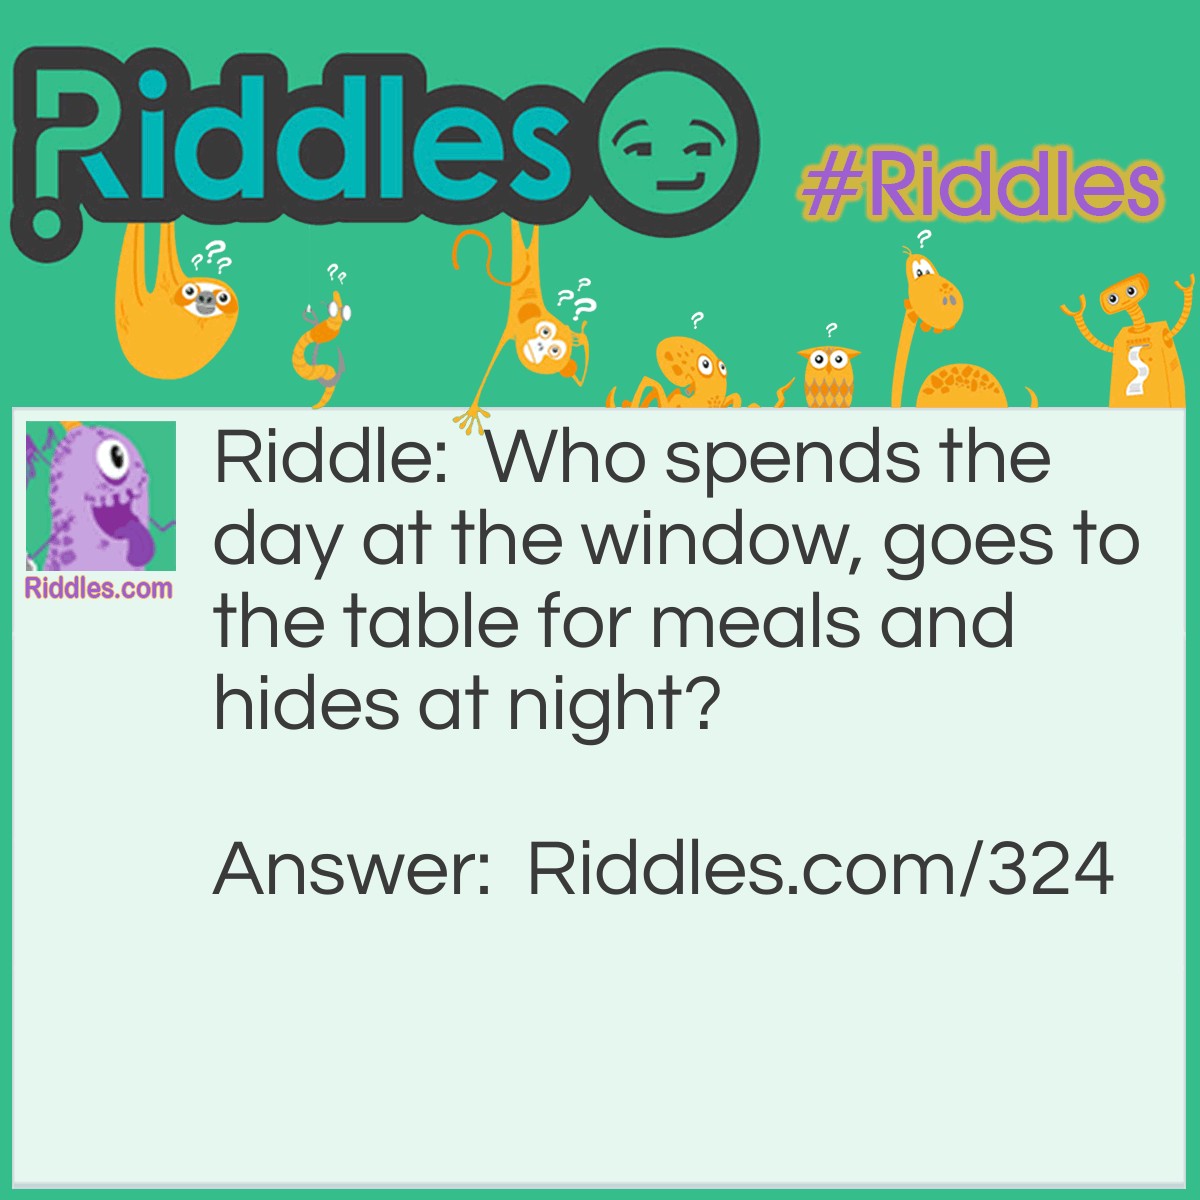 Riddle: Who spends the day at the window, goes to the table for meals and hides at night? Answer: A fly.